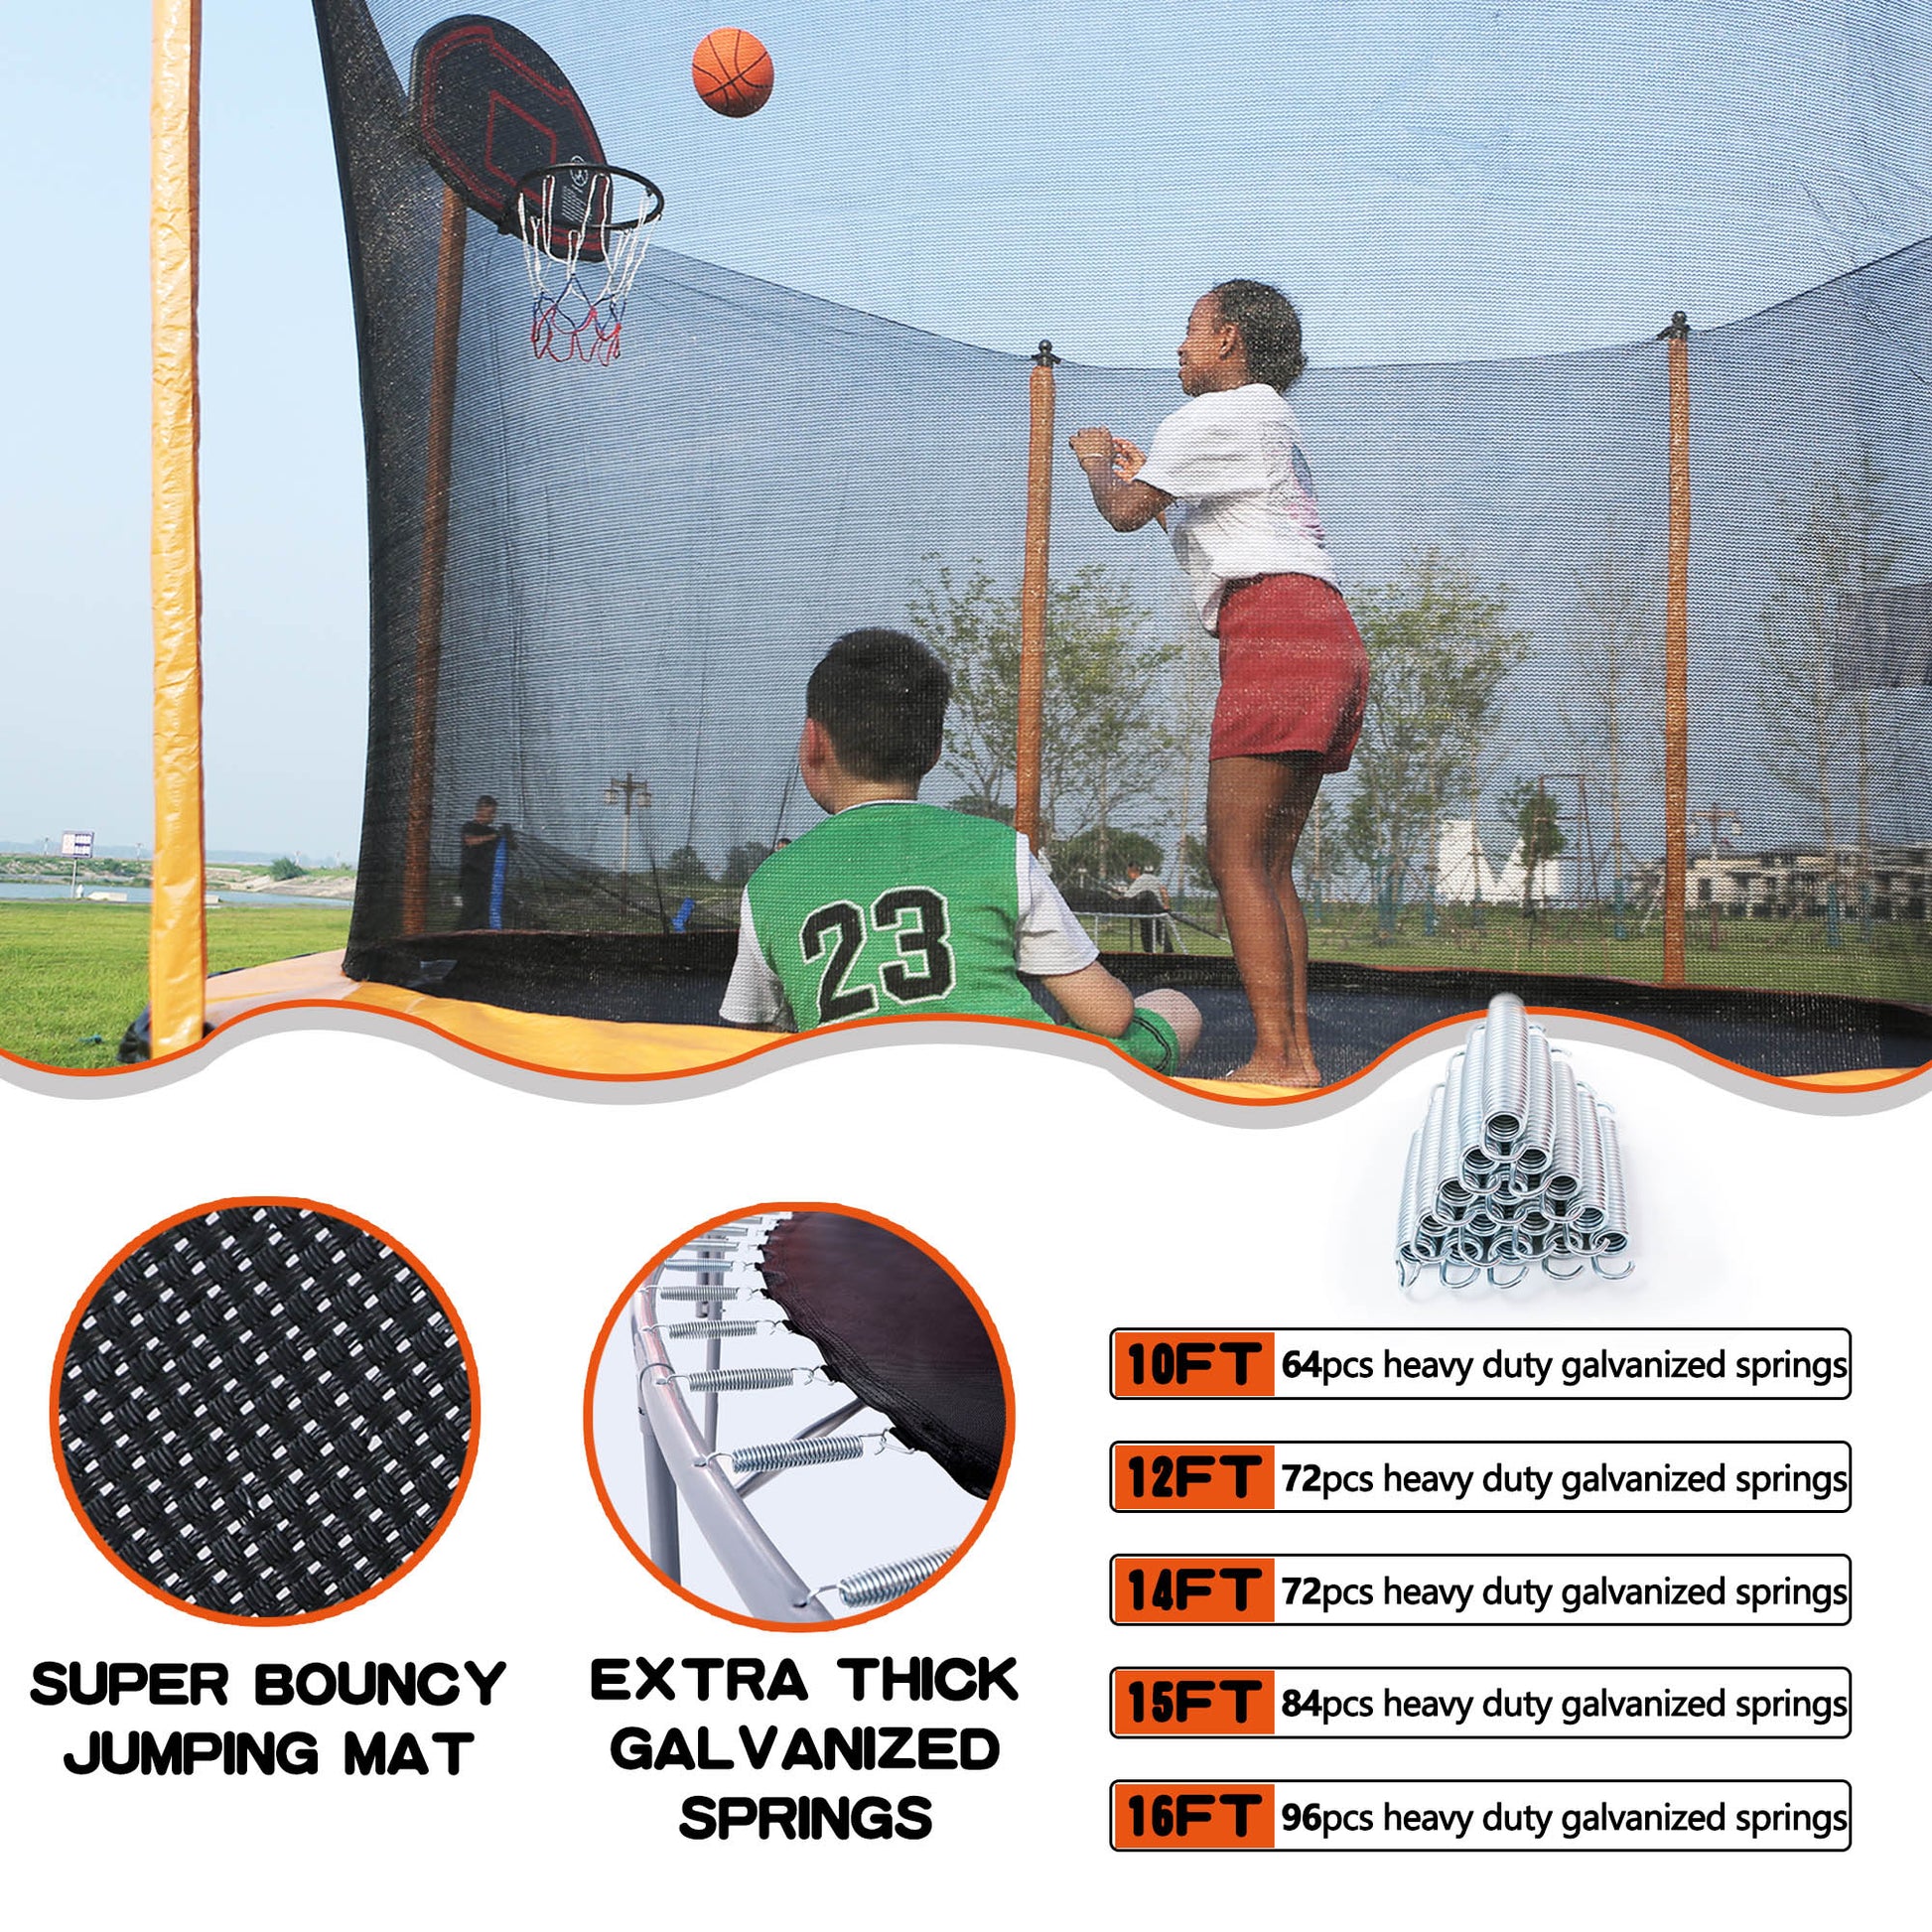 a girl and a boy playing basketball on a trampoline and underneath it says, super bounce mat and Extra thick galvanized spring, Next to it says, 10ft has 64 springs, 12ft has 72 springs, 14ft has 72 springs, 15ft has 84 springs, 16ft has 96 springs